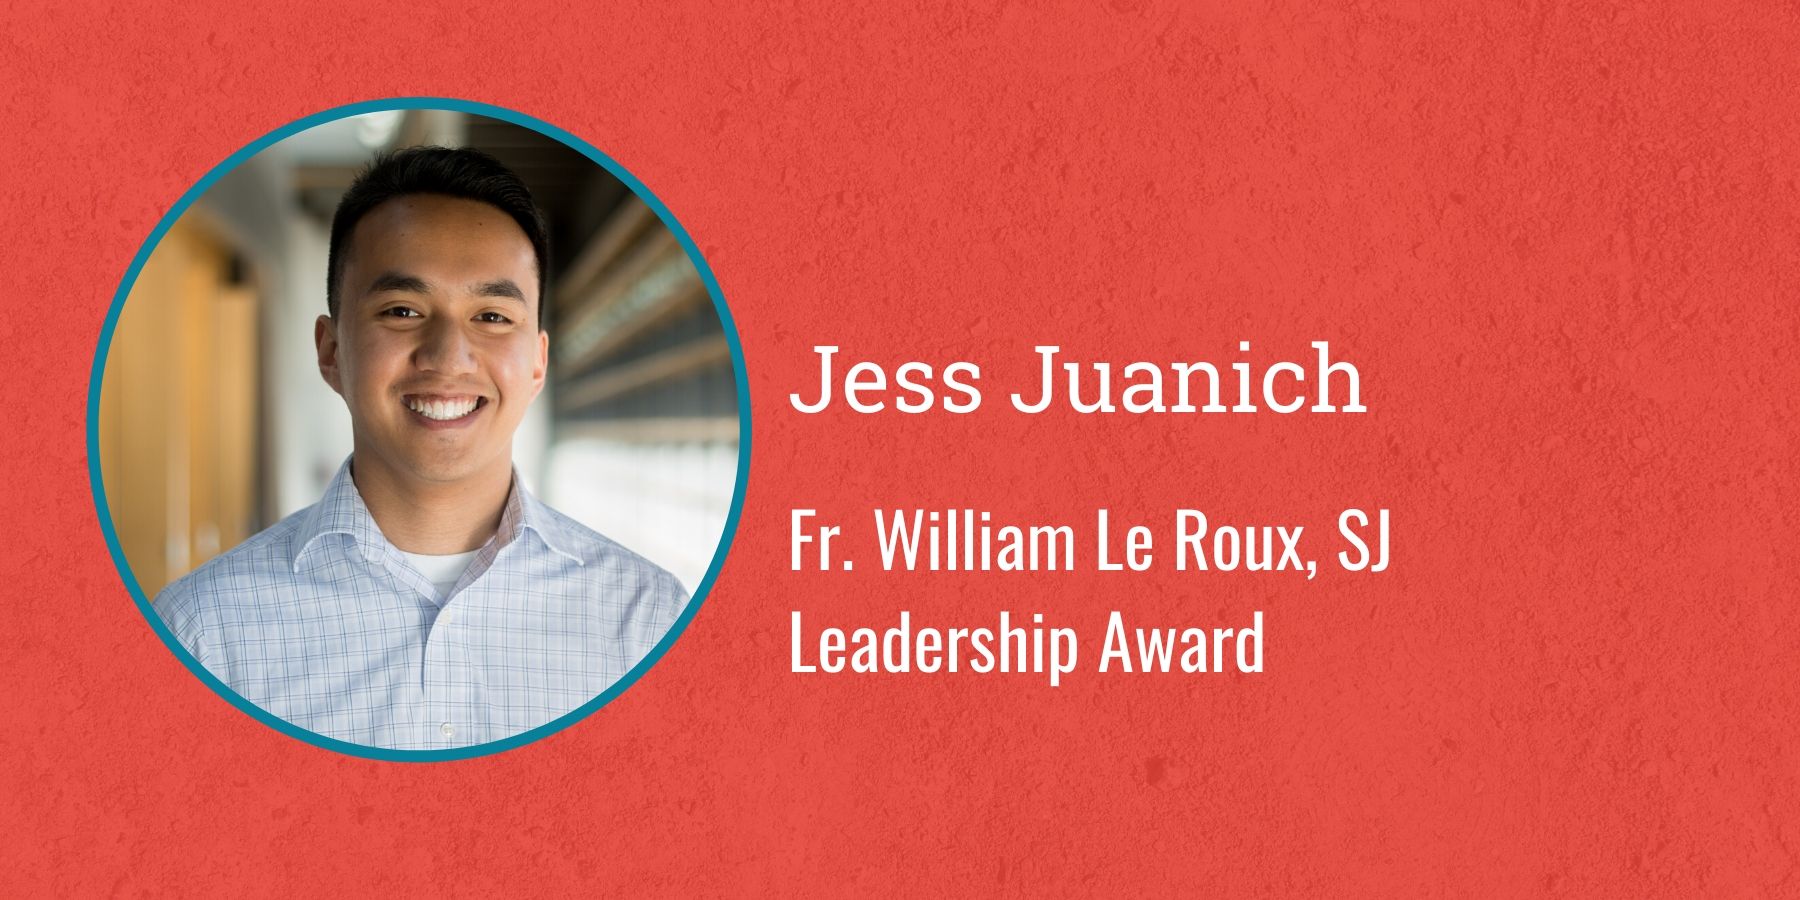 Photo of Jess Juanich and text Jess Juanich, Father William Le Roux SJ Leadership Award